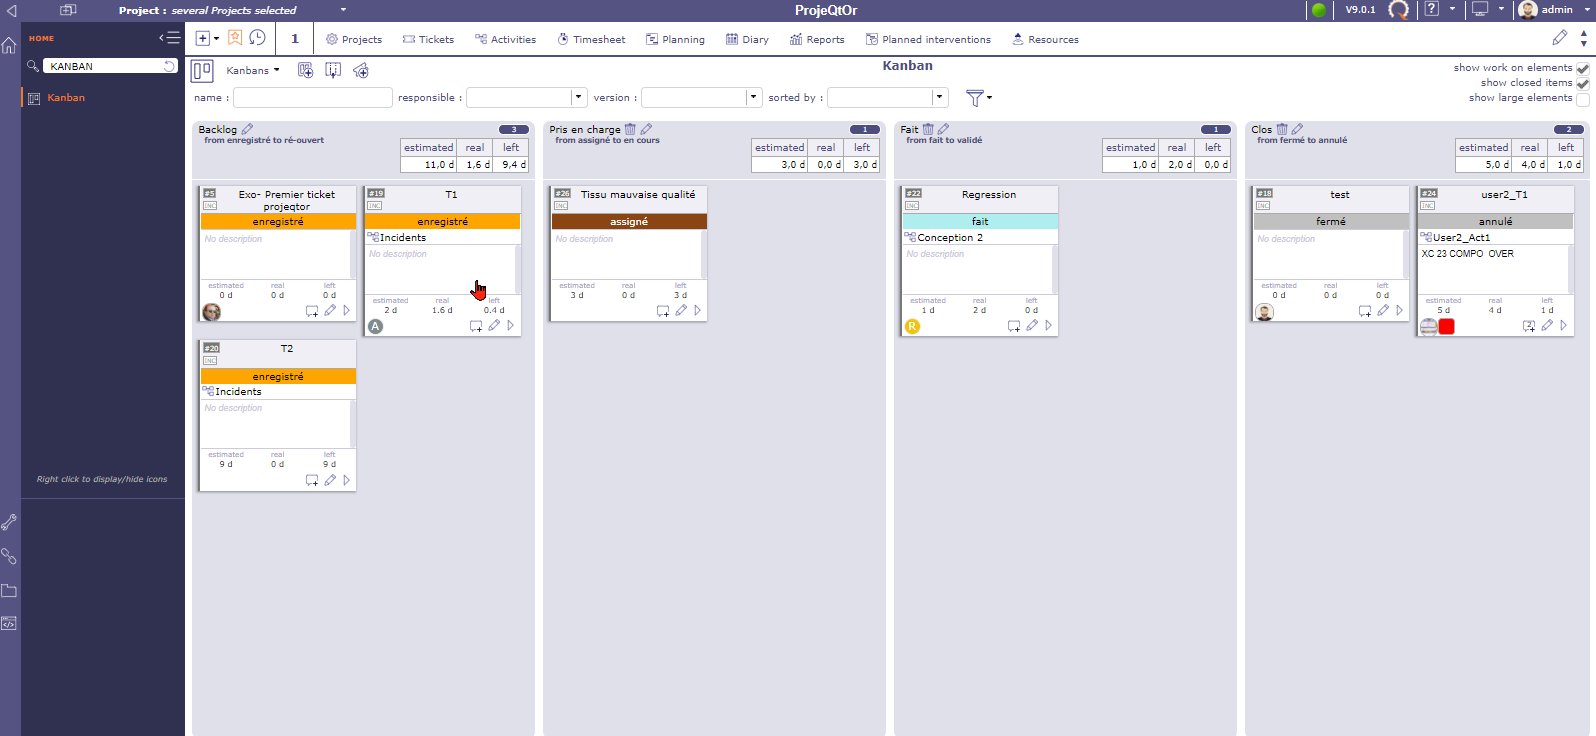 ProjeQtOr - Kanban boards
Boards for Tickets, Activities, Actions or Requirements